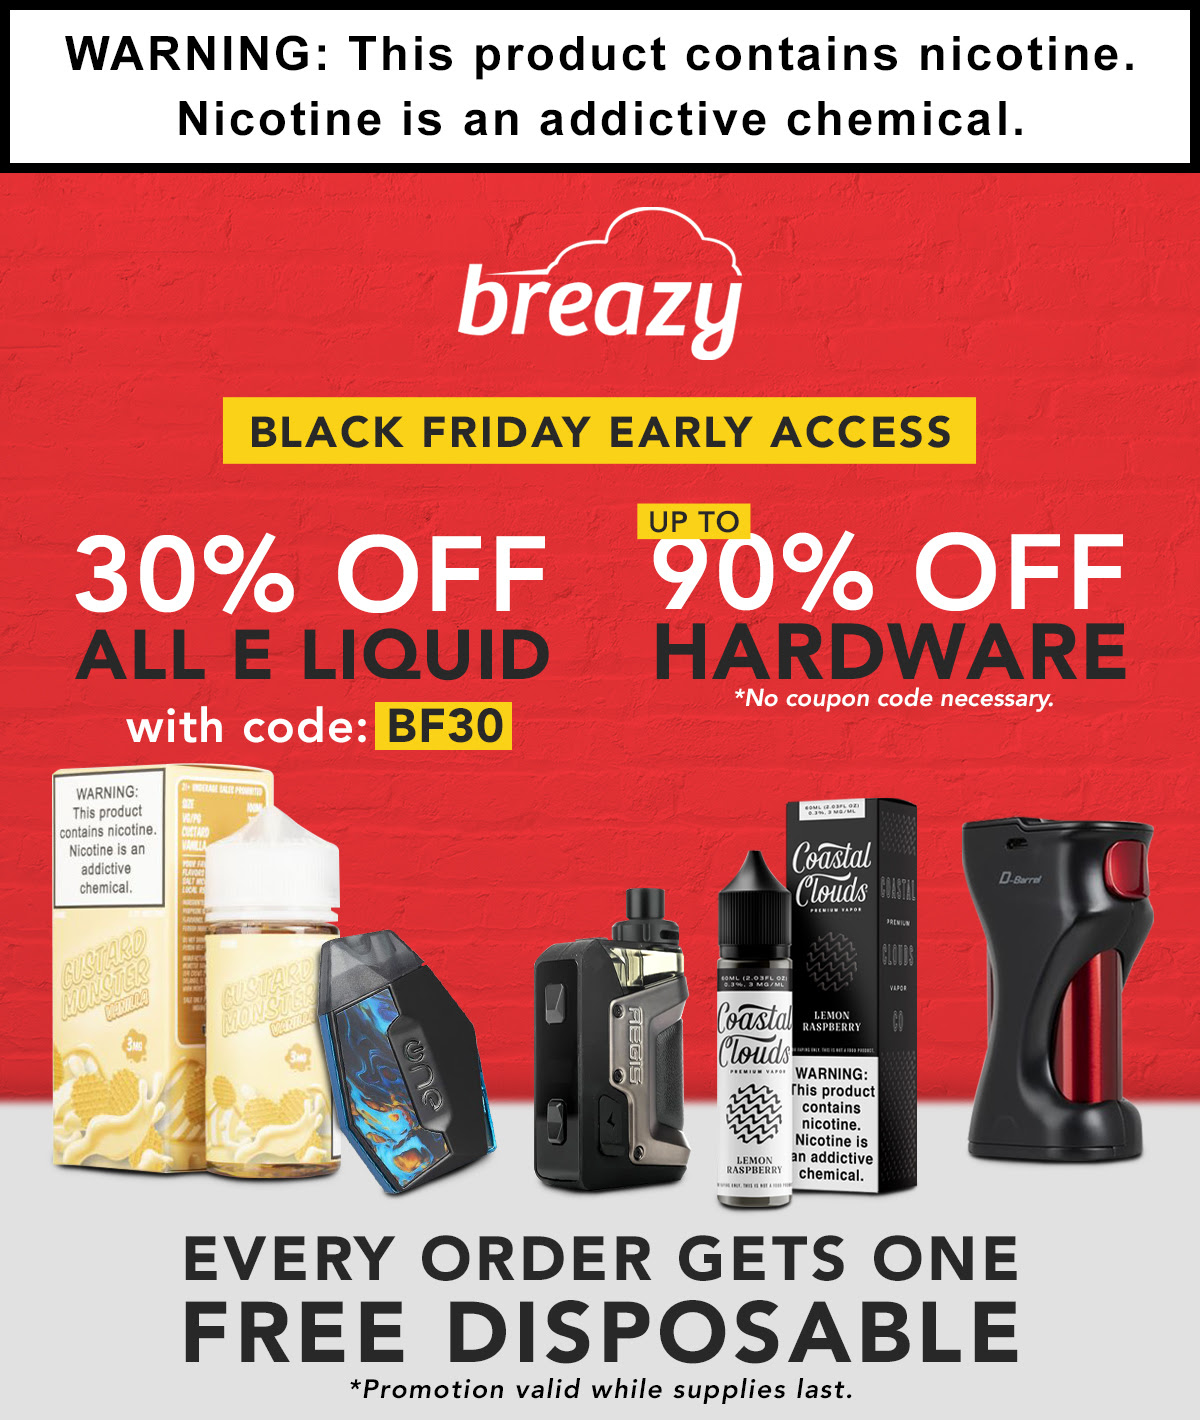 Black Friday Early Access 30% Off All E Liquid with code: BF30 + Up To 90% Off Hardware